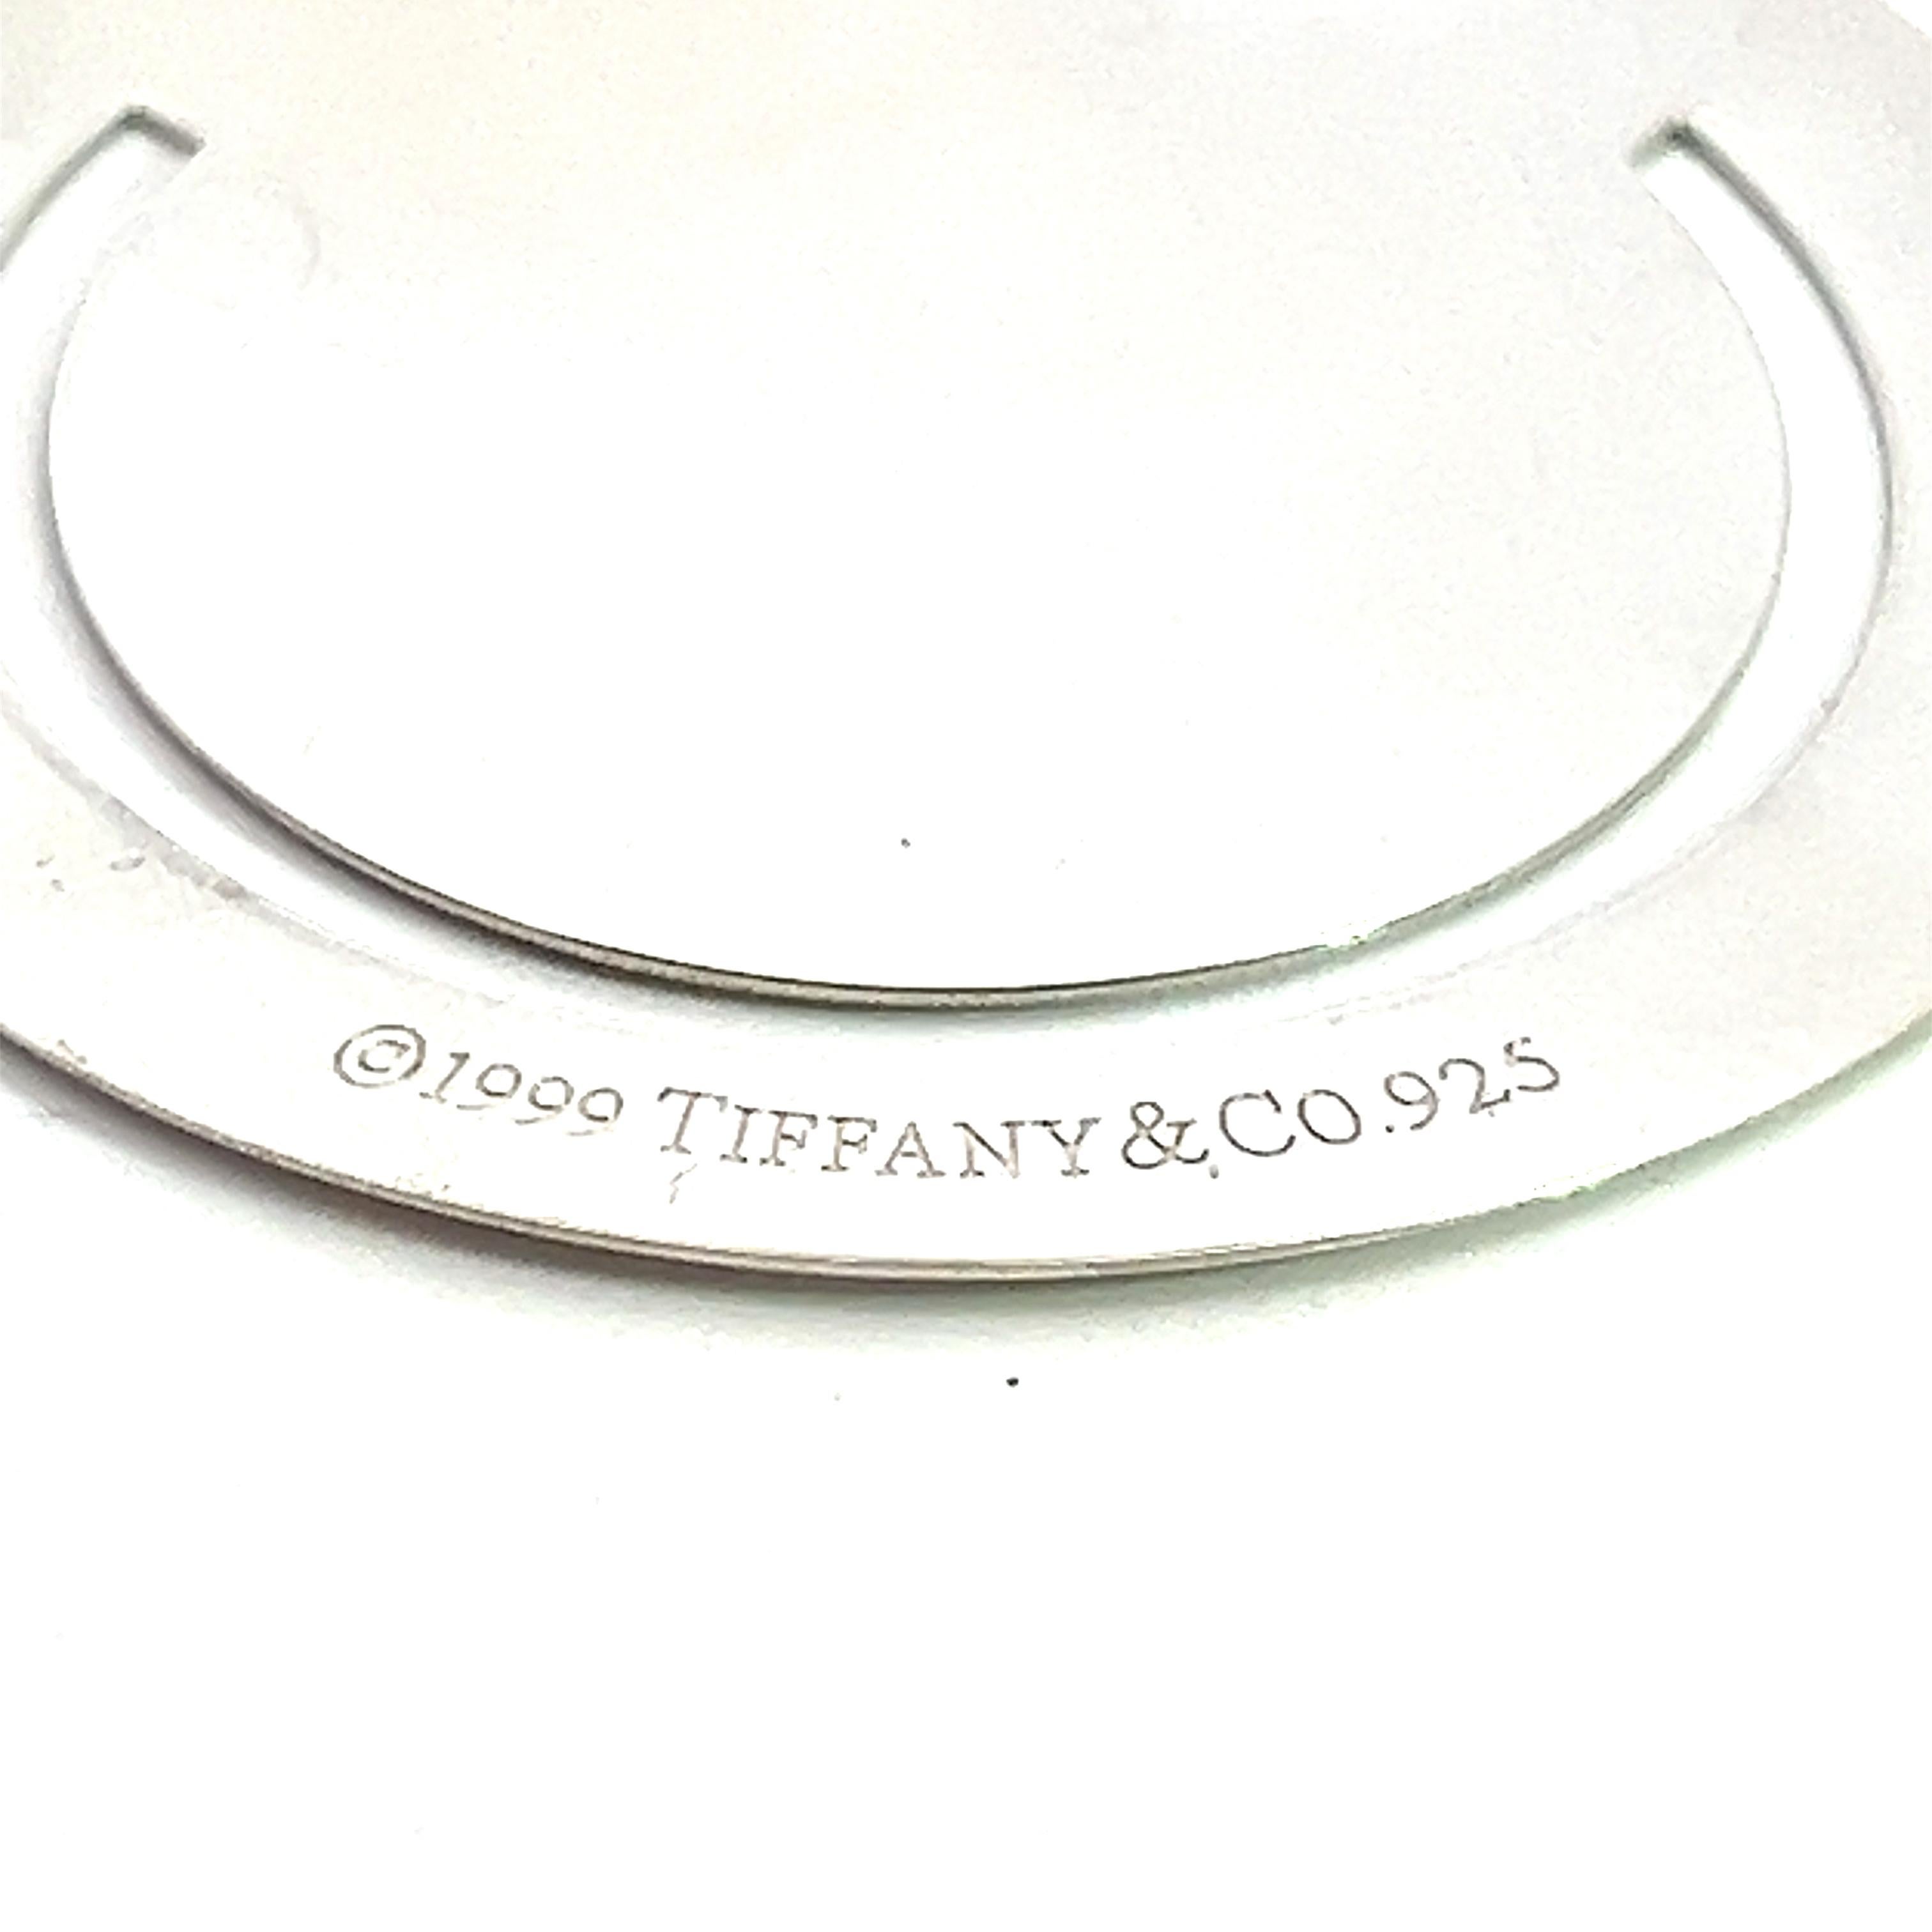 Tiffany & Co Estate Bookmark Sterling Silver TIF530

TRUSTED SELLER SINCE 2002

PLEASE SEE OUR HUNDREDS OF POSITIVE FEEDBACKS FROM OUR CLIENTS!!

FREE SHIPPING

This elegant Authentic Tiffany & Co. sterling silver bookmark has a weight of 10.90